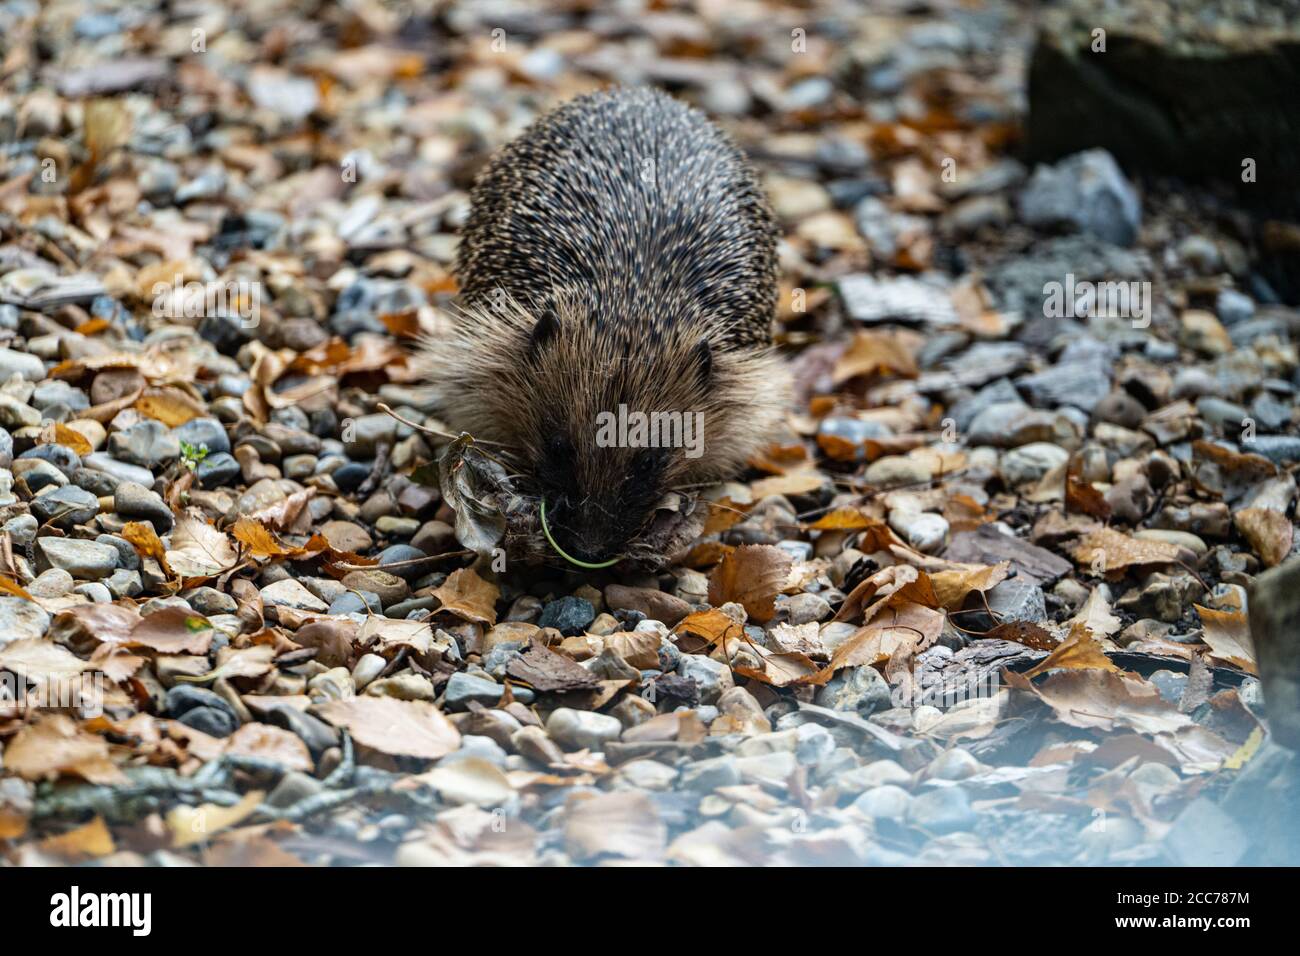 A hedgehog collecting autumn leaves to prepare for hibernation, UK Stock Photo